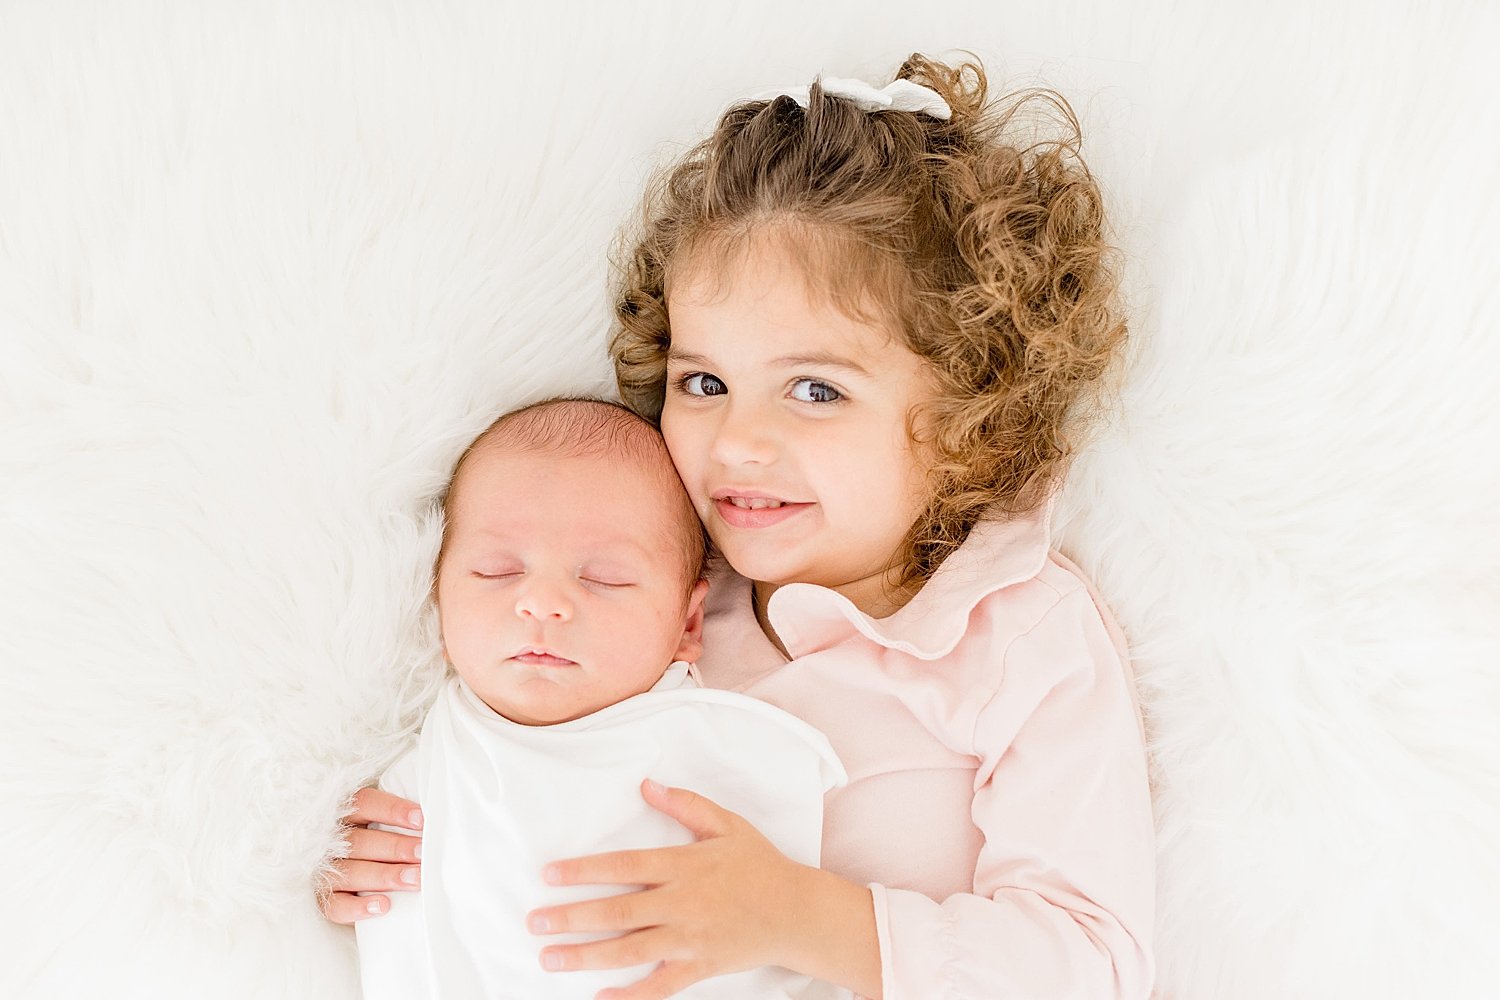 Big sister with baby brother | Ambre Williams Photography